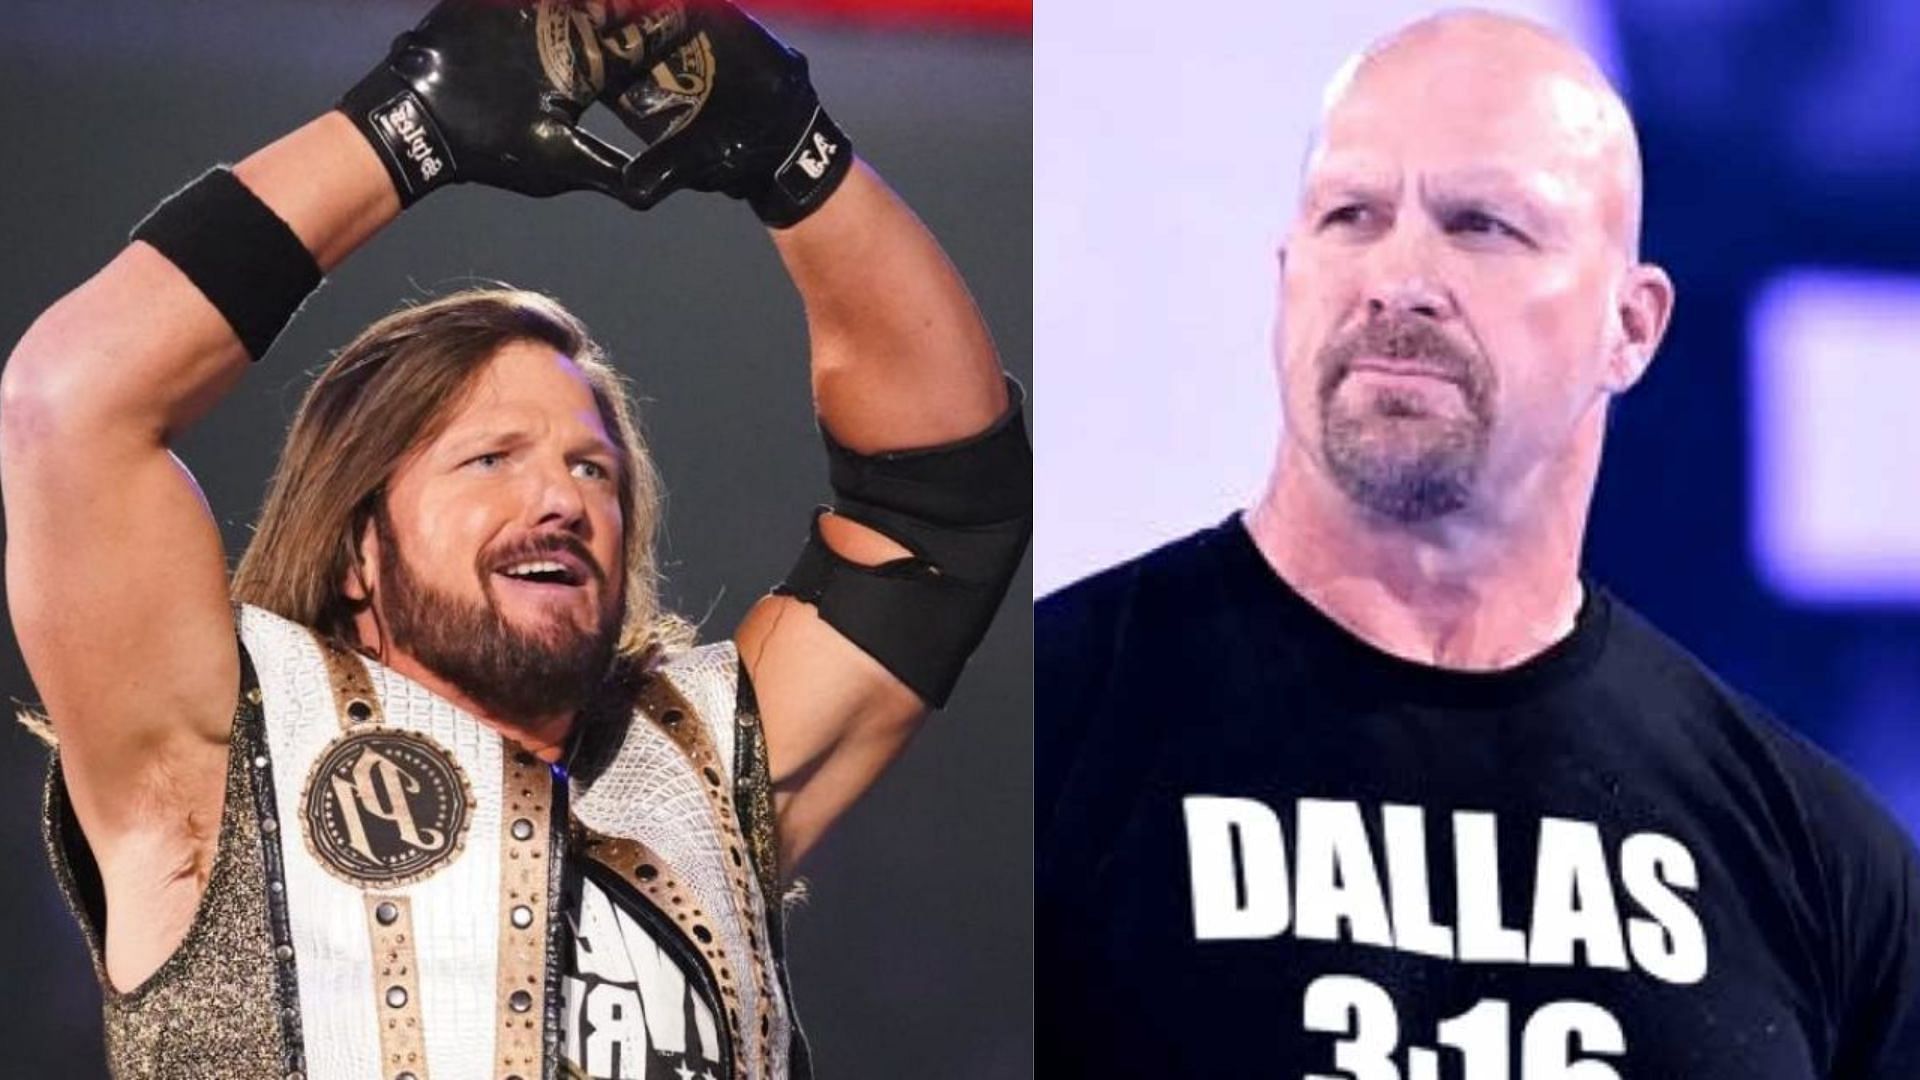 AJ Styles versus Steve Austin is a rare dream match that seems plausible to happen at this point